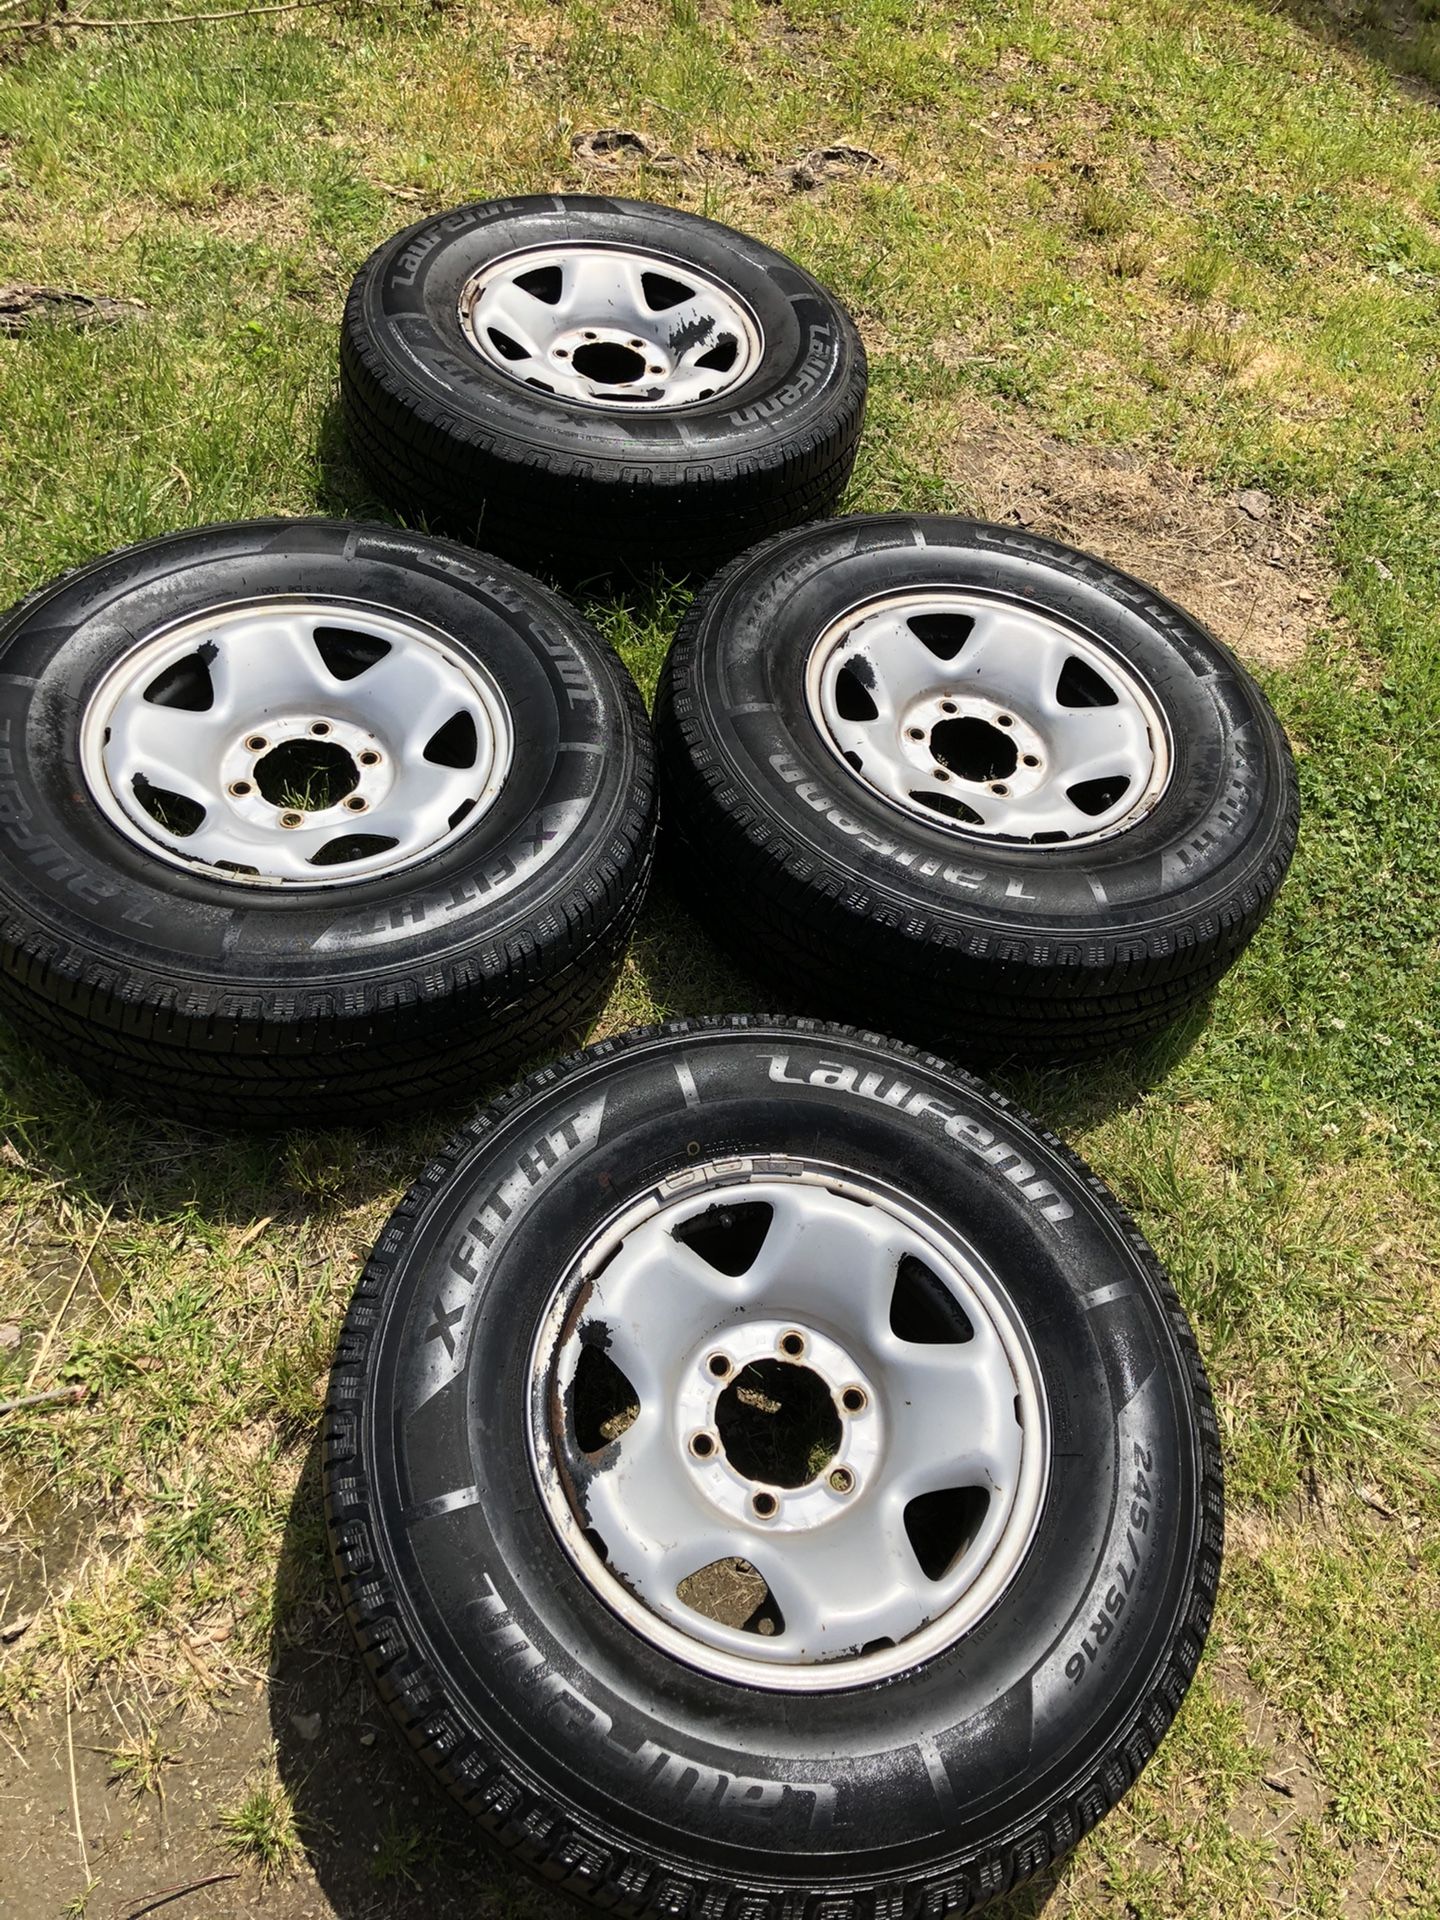 Toyota Tacoma wheels and tires